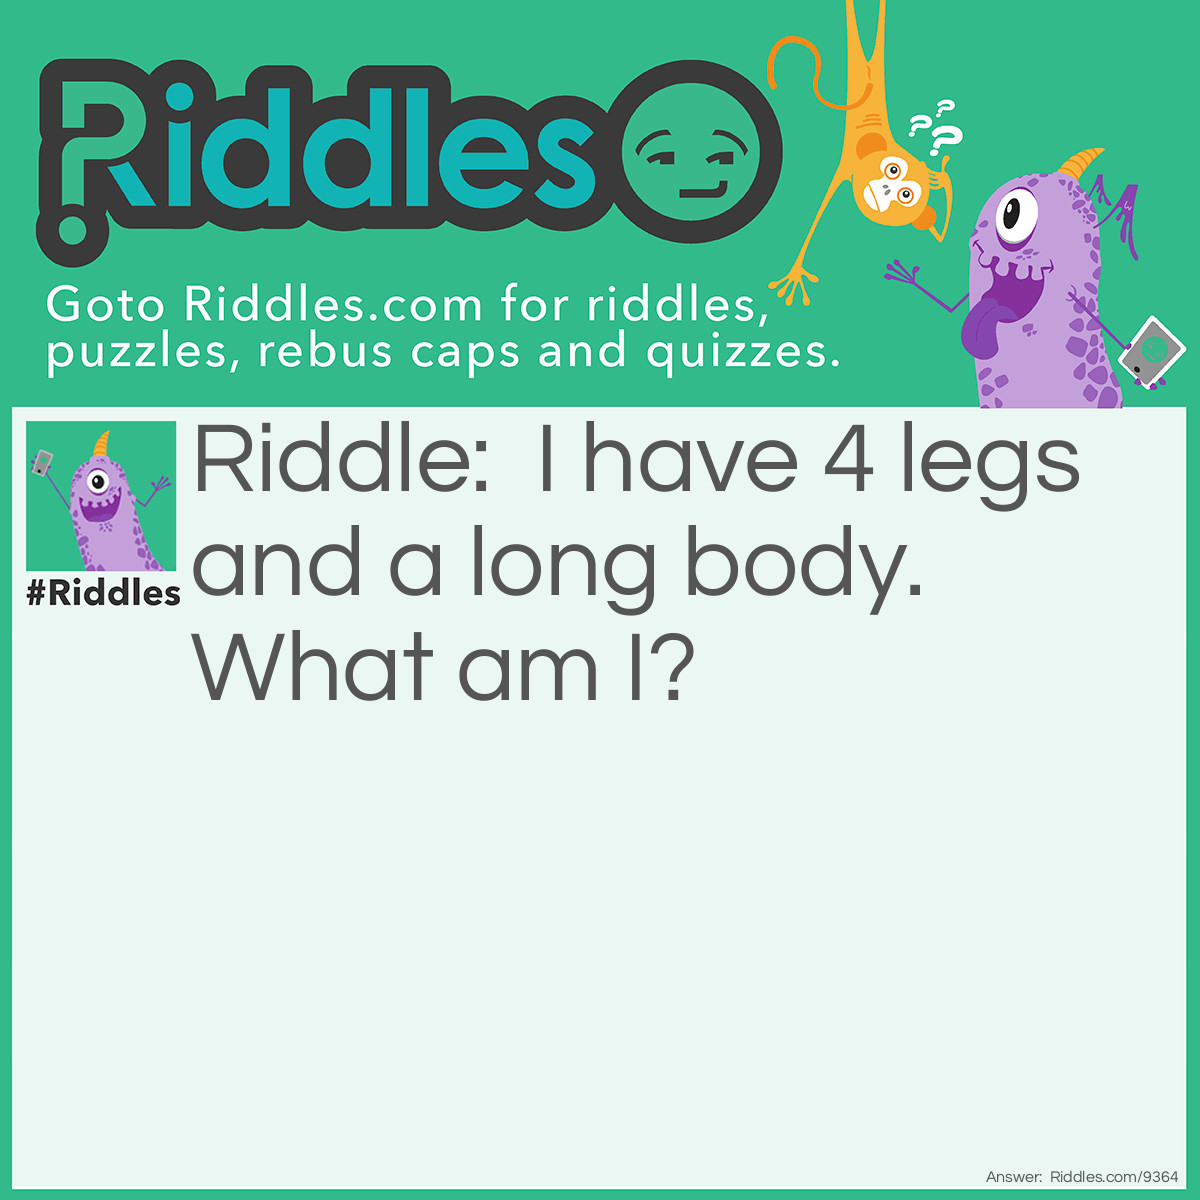 Riddle: I have 4 legs and a long body. What am I? Answer: A table.